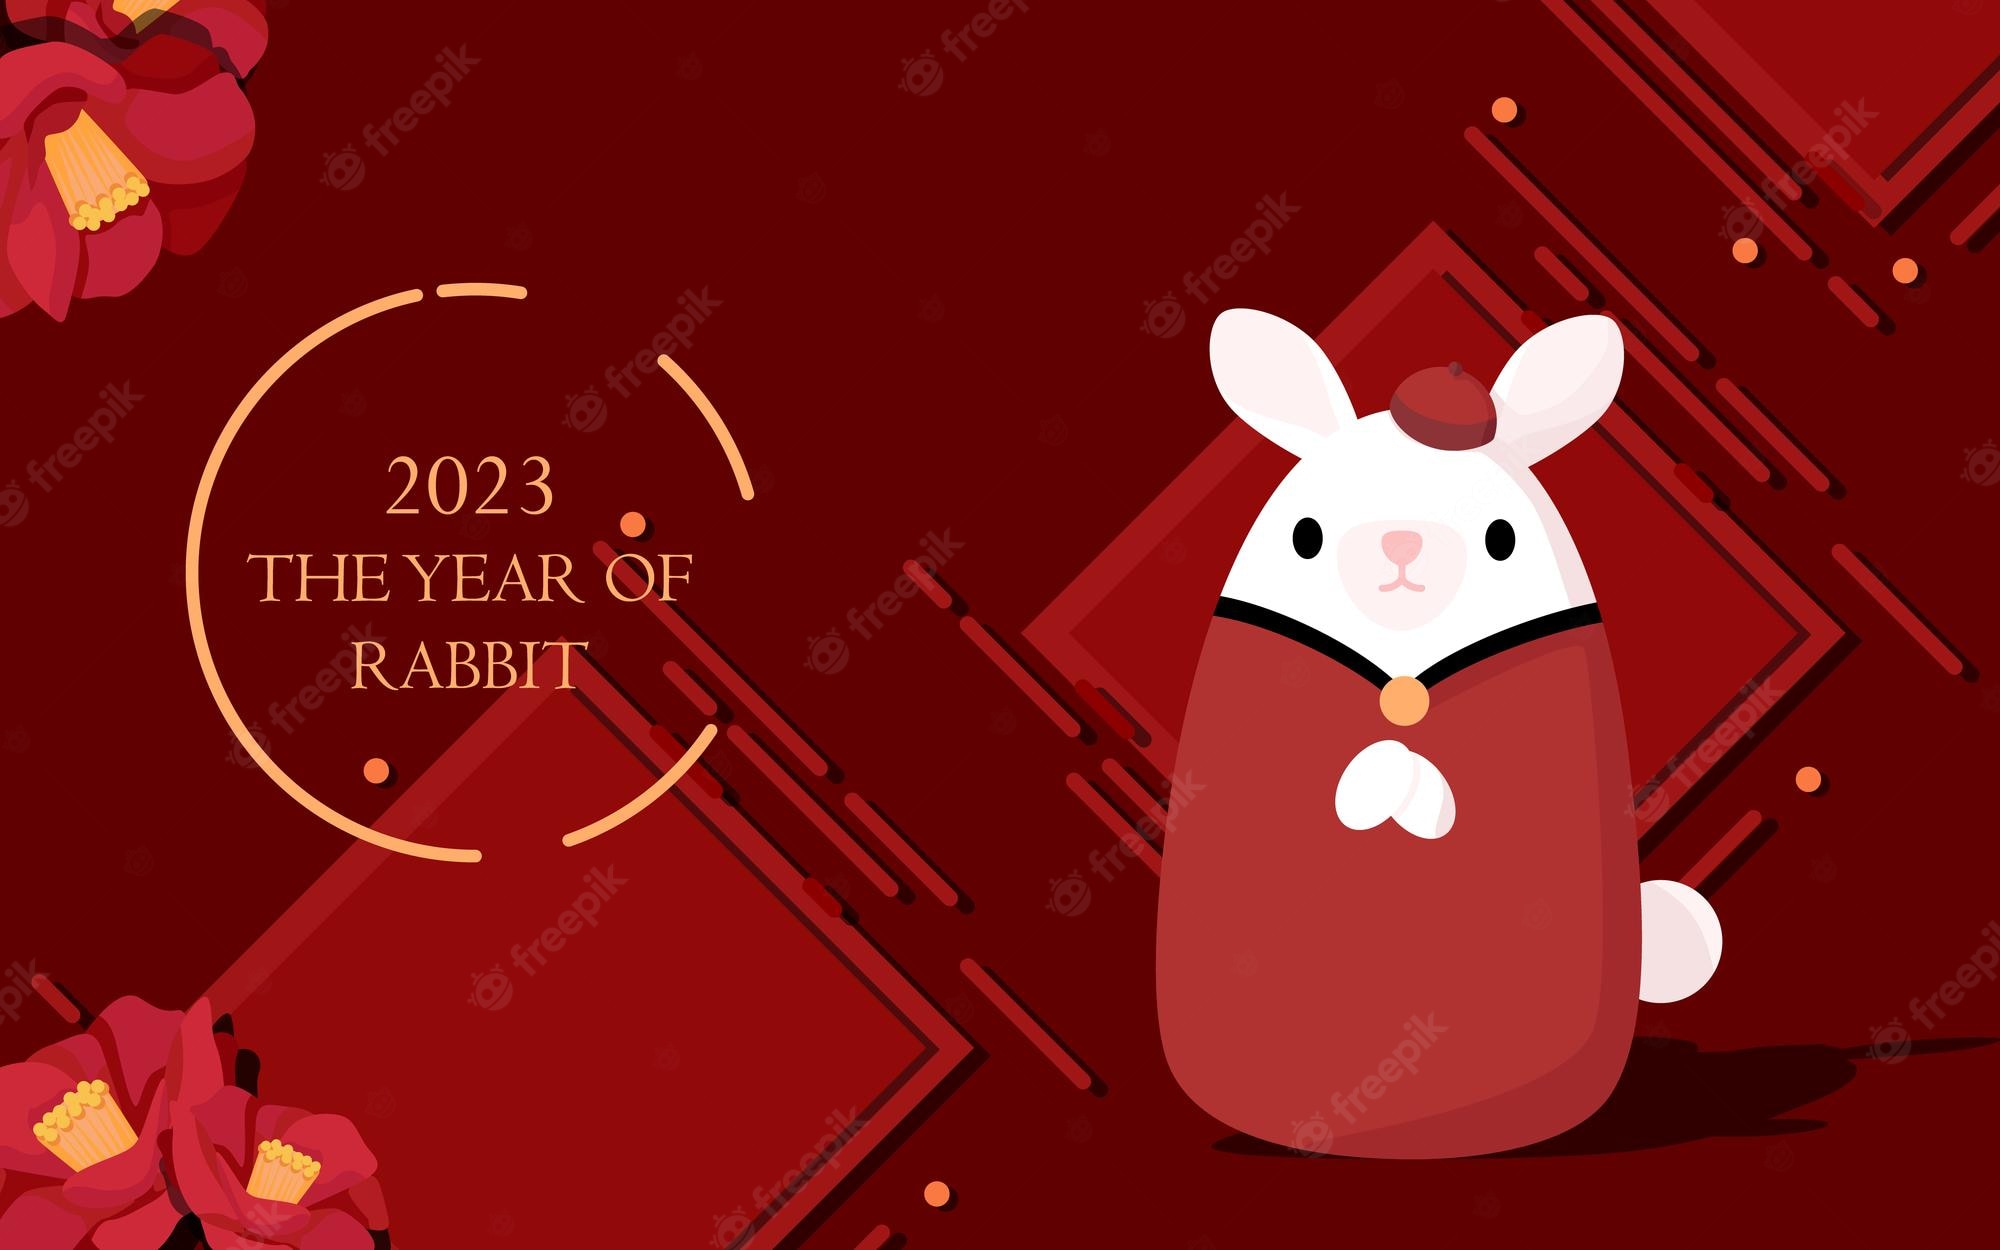 Premium Vector chinese new year wallpaper in flat design style